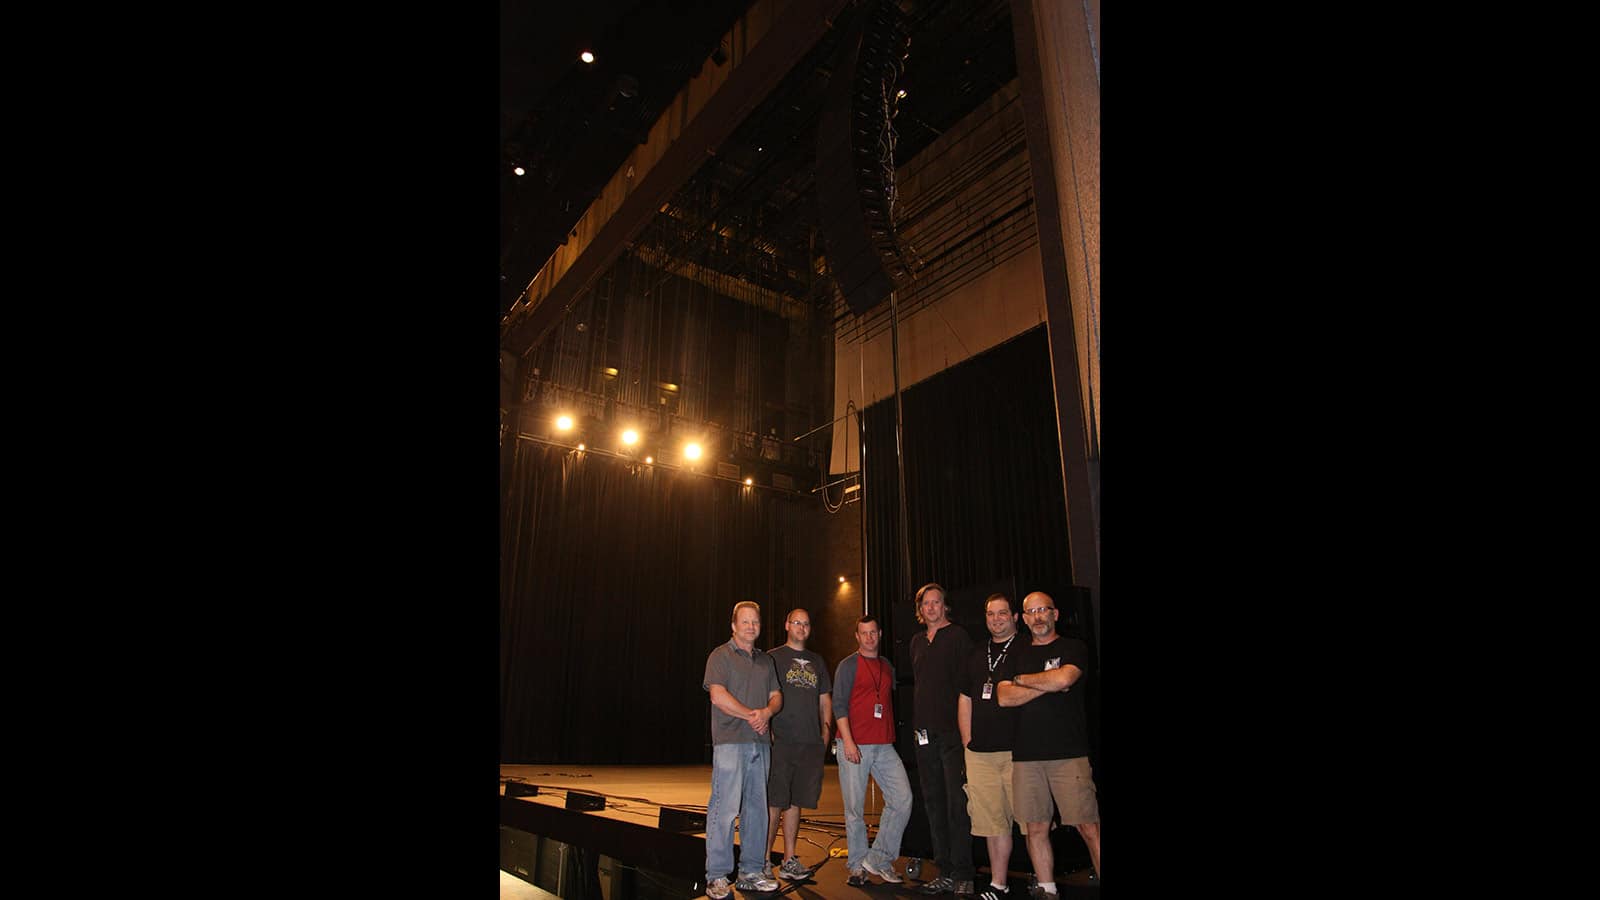 L to R: Rick Shimer, Ted Daniels (Blackhawk Audio), Ray Park (TPAC), Larry Bryan, Jeff Ent (TPAC), and Mac Whitley (TPAC)